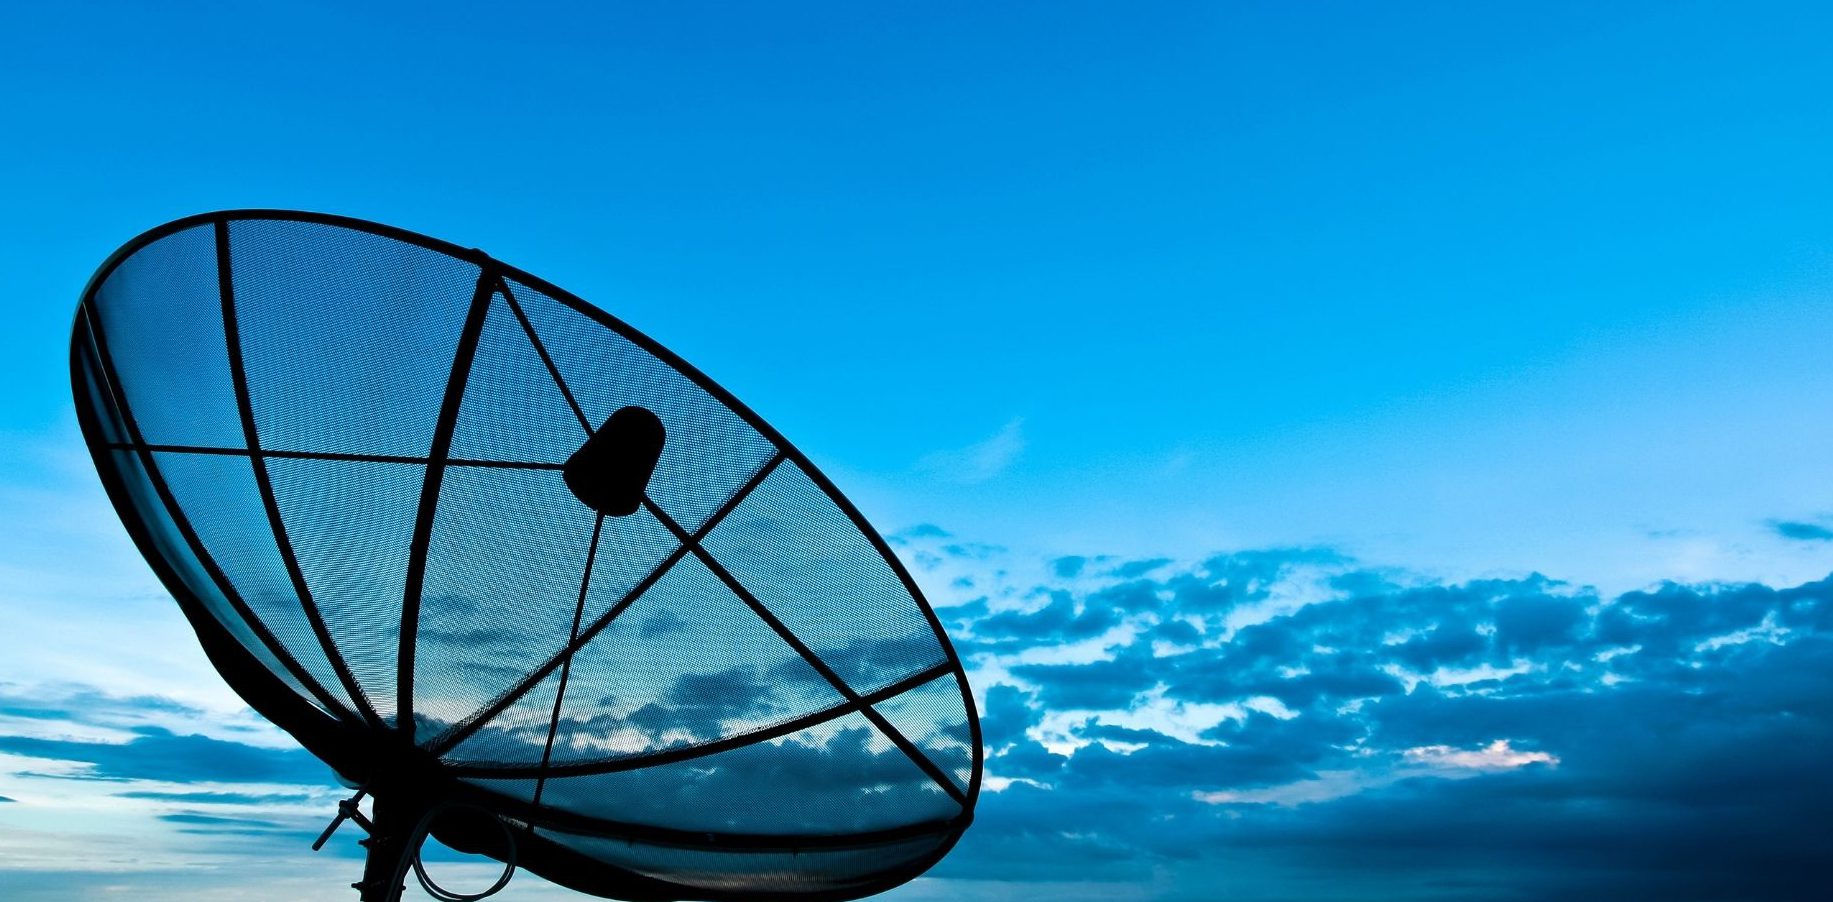 Global Telecom Market Outlook, Opportunities And Strategies